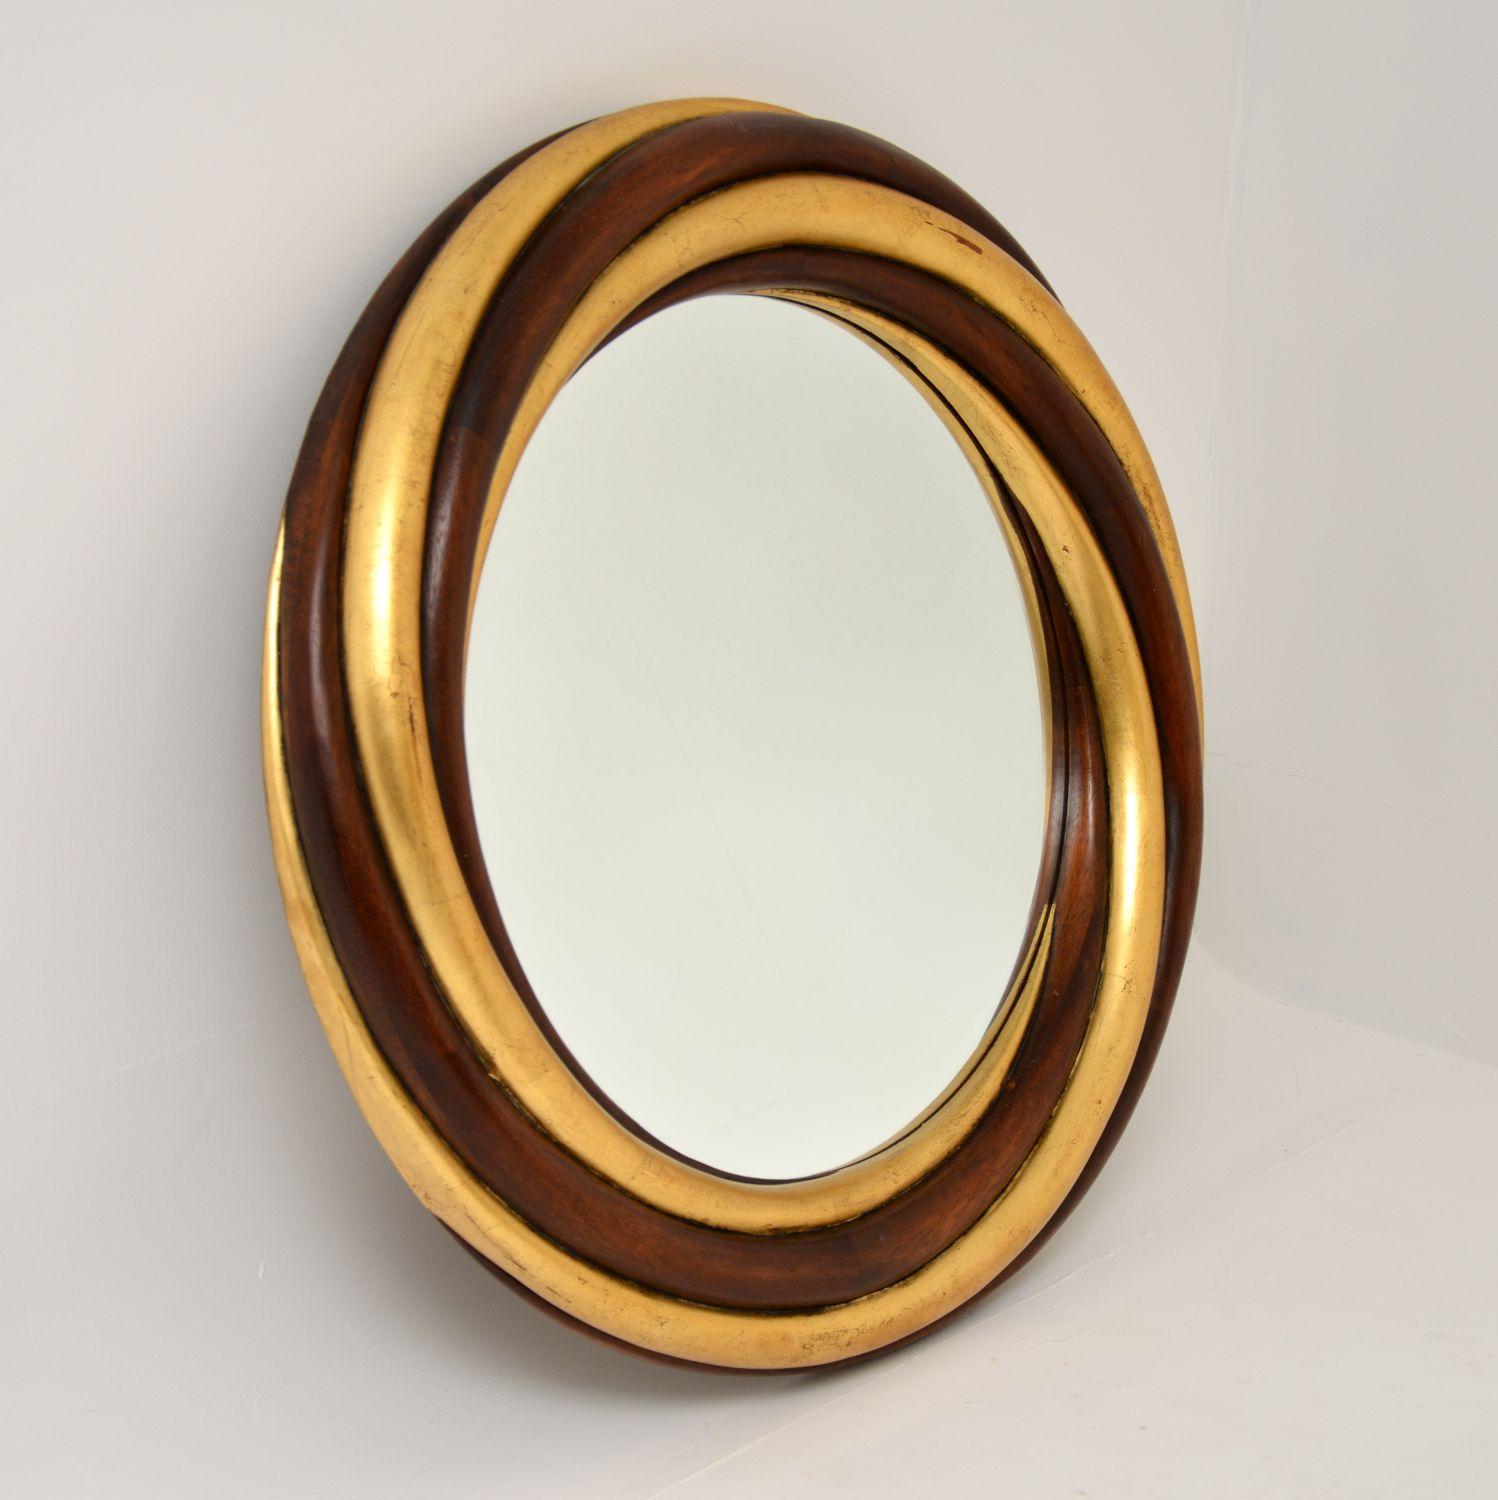 A large and stunning vintage circular wall mirror, this was made by the high end manufacturer Harrison & Gil. It was made in the USA and dates from circa 1980s.

The quality is incredible, the solid mahogany and gilt wood frame is beautifully